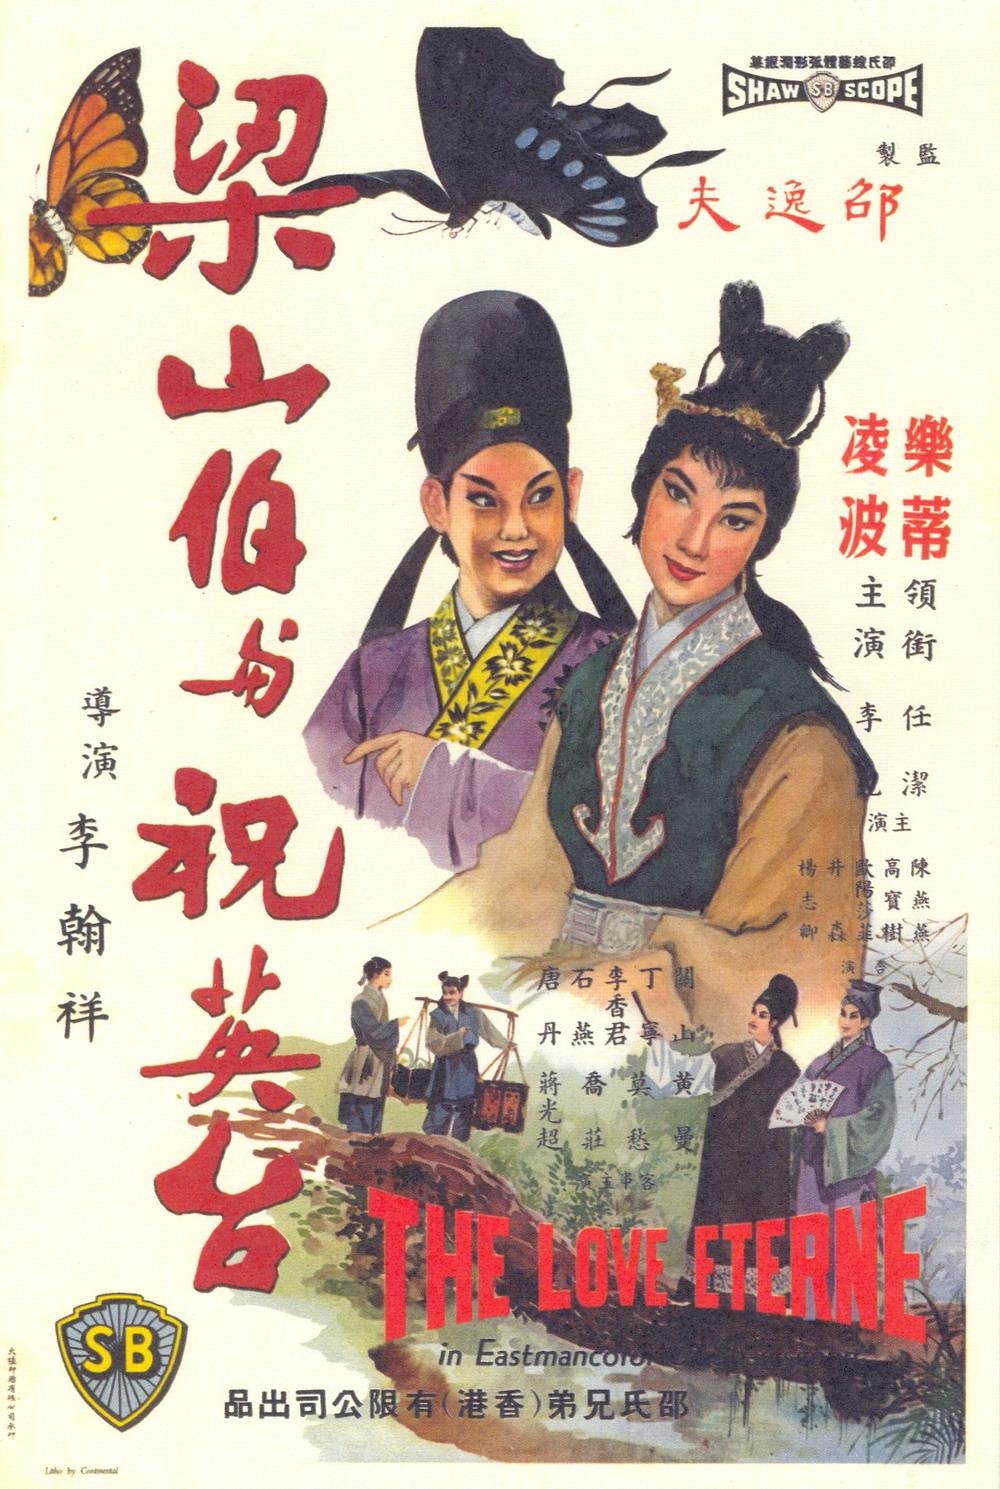 Mandarin poster of the movie The Love Eterne